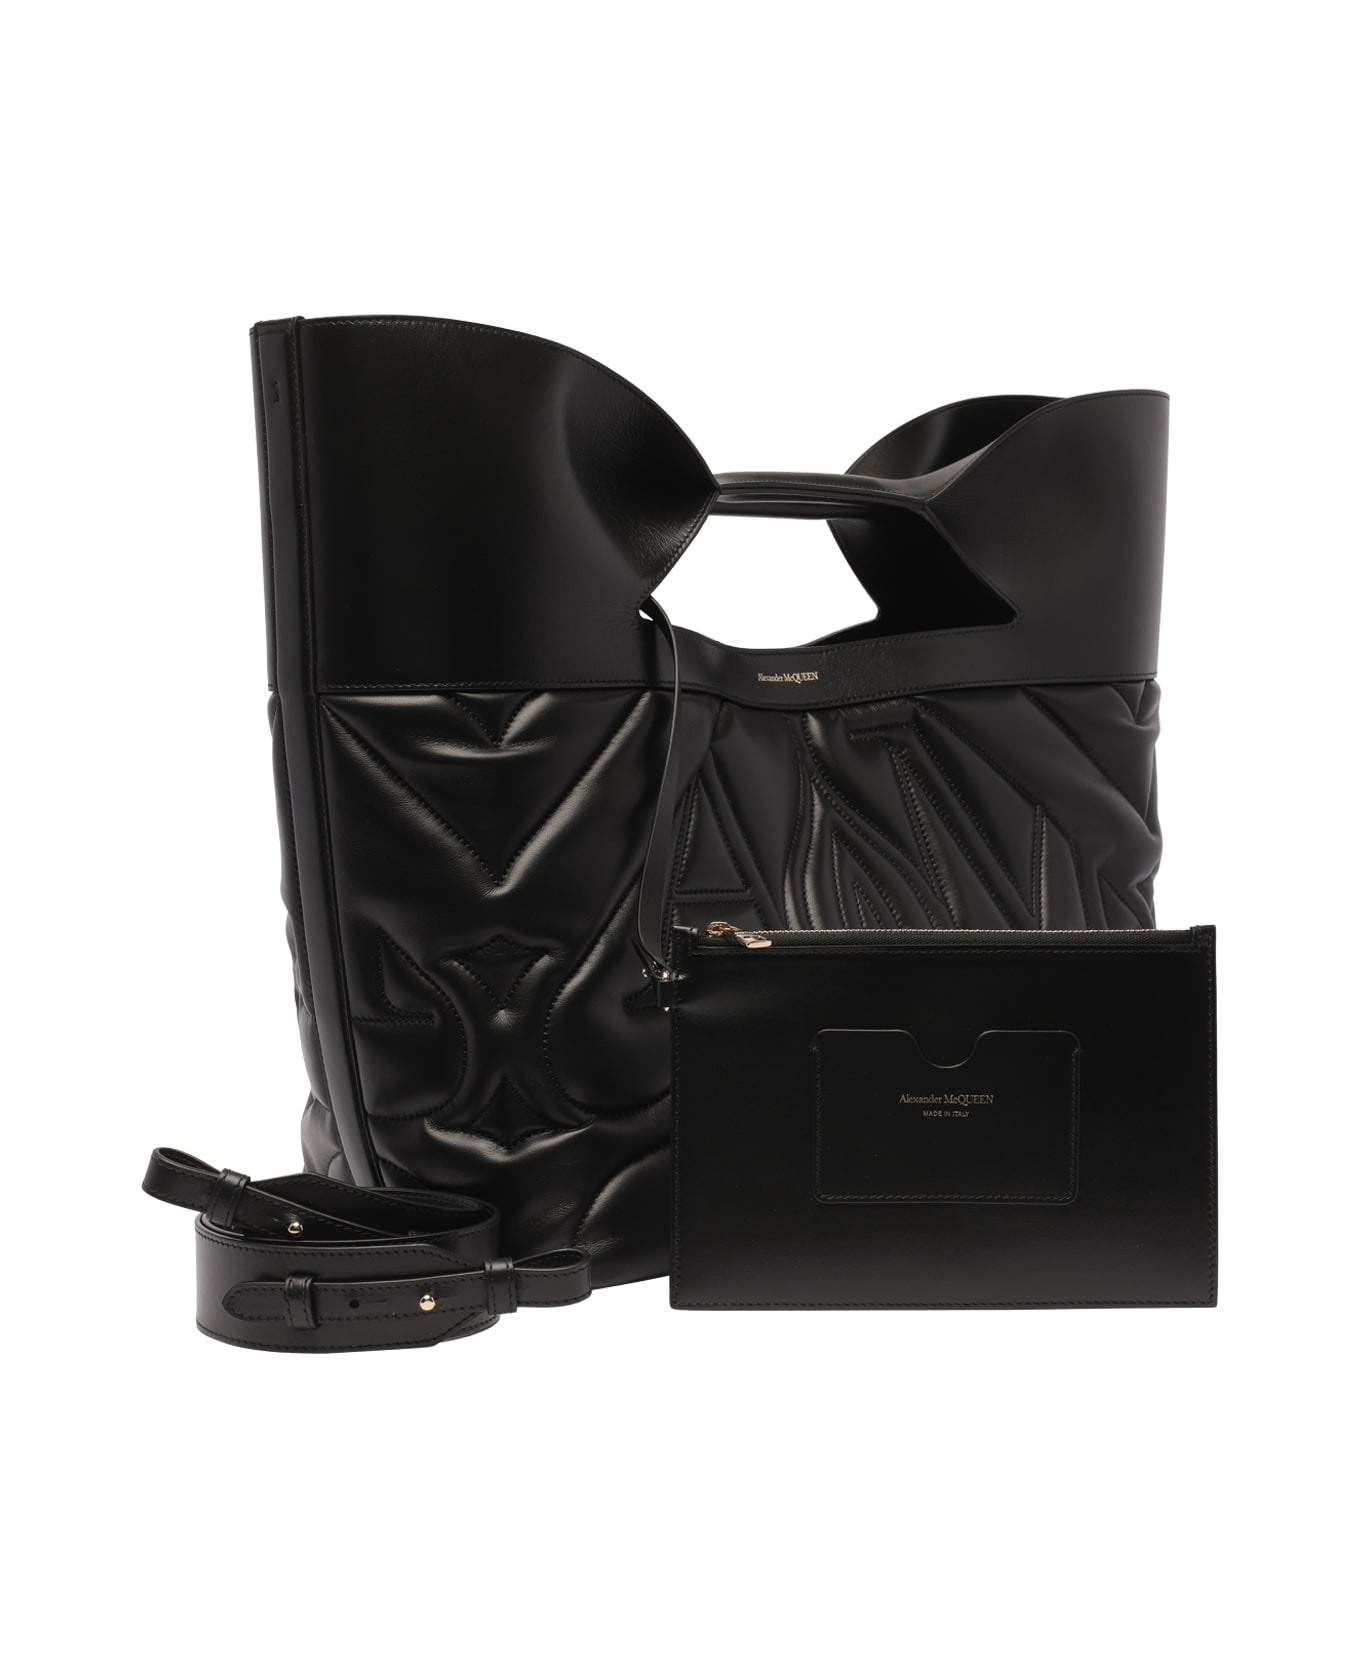 Alexander McQueen Large The Bow Bag In Quilted Black Leather - Nero